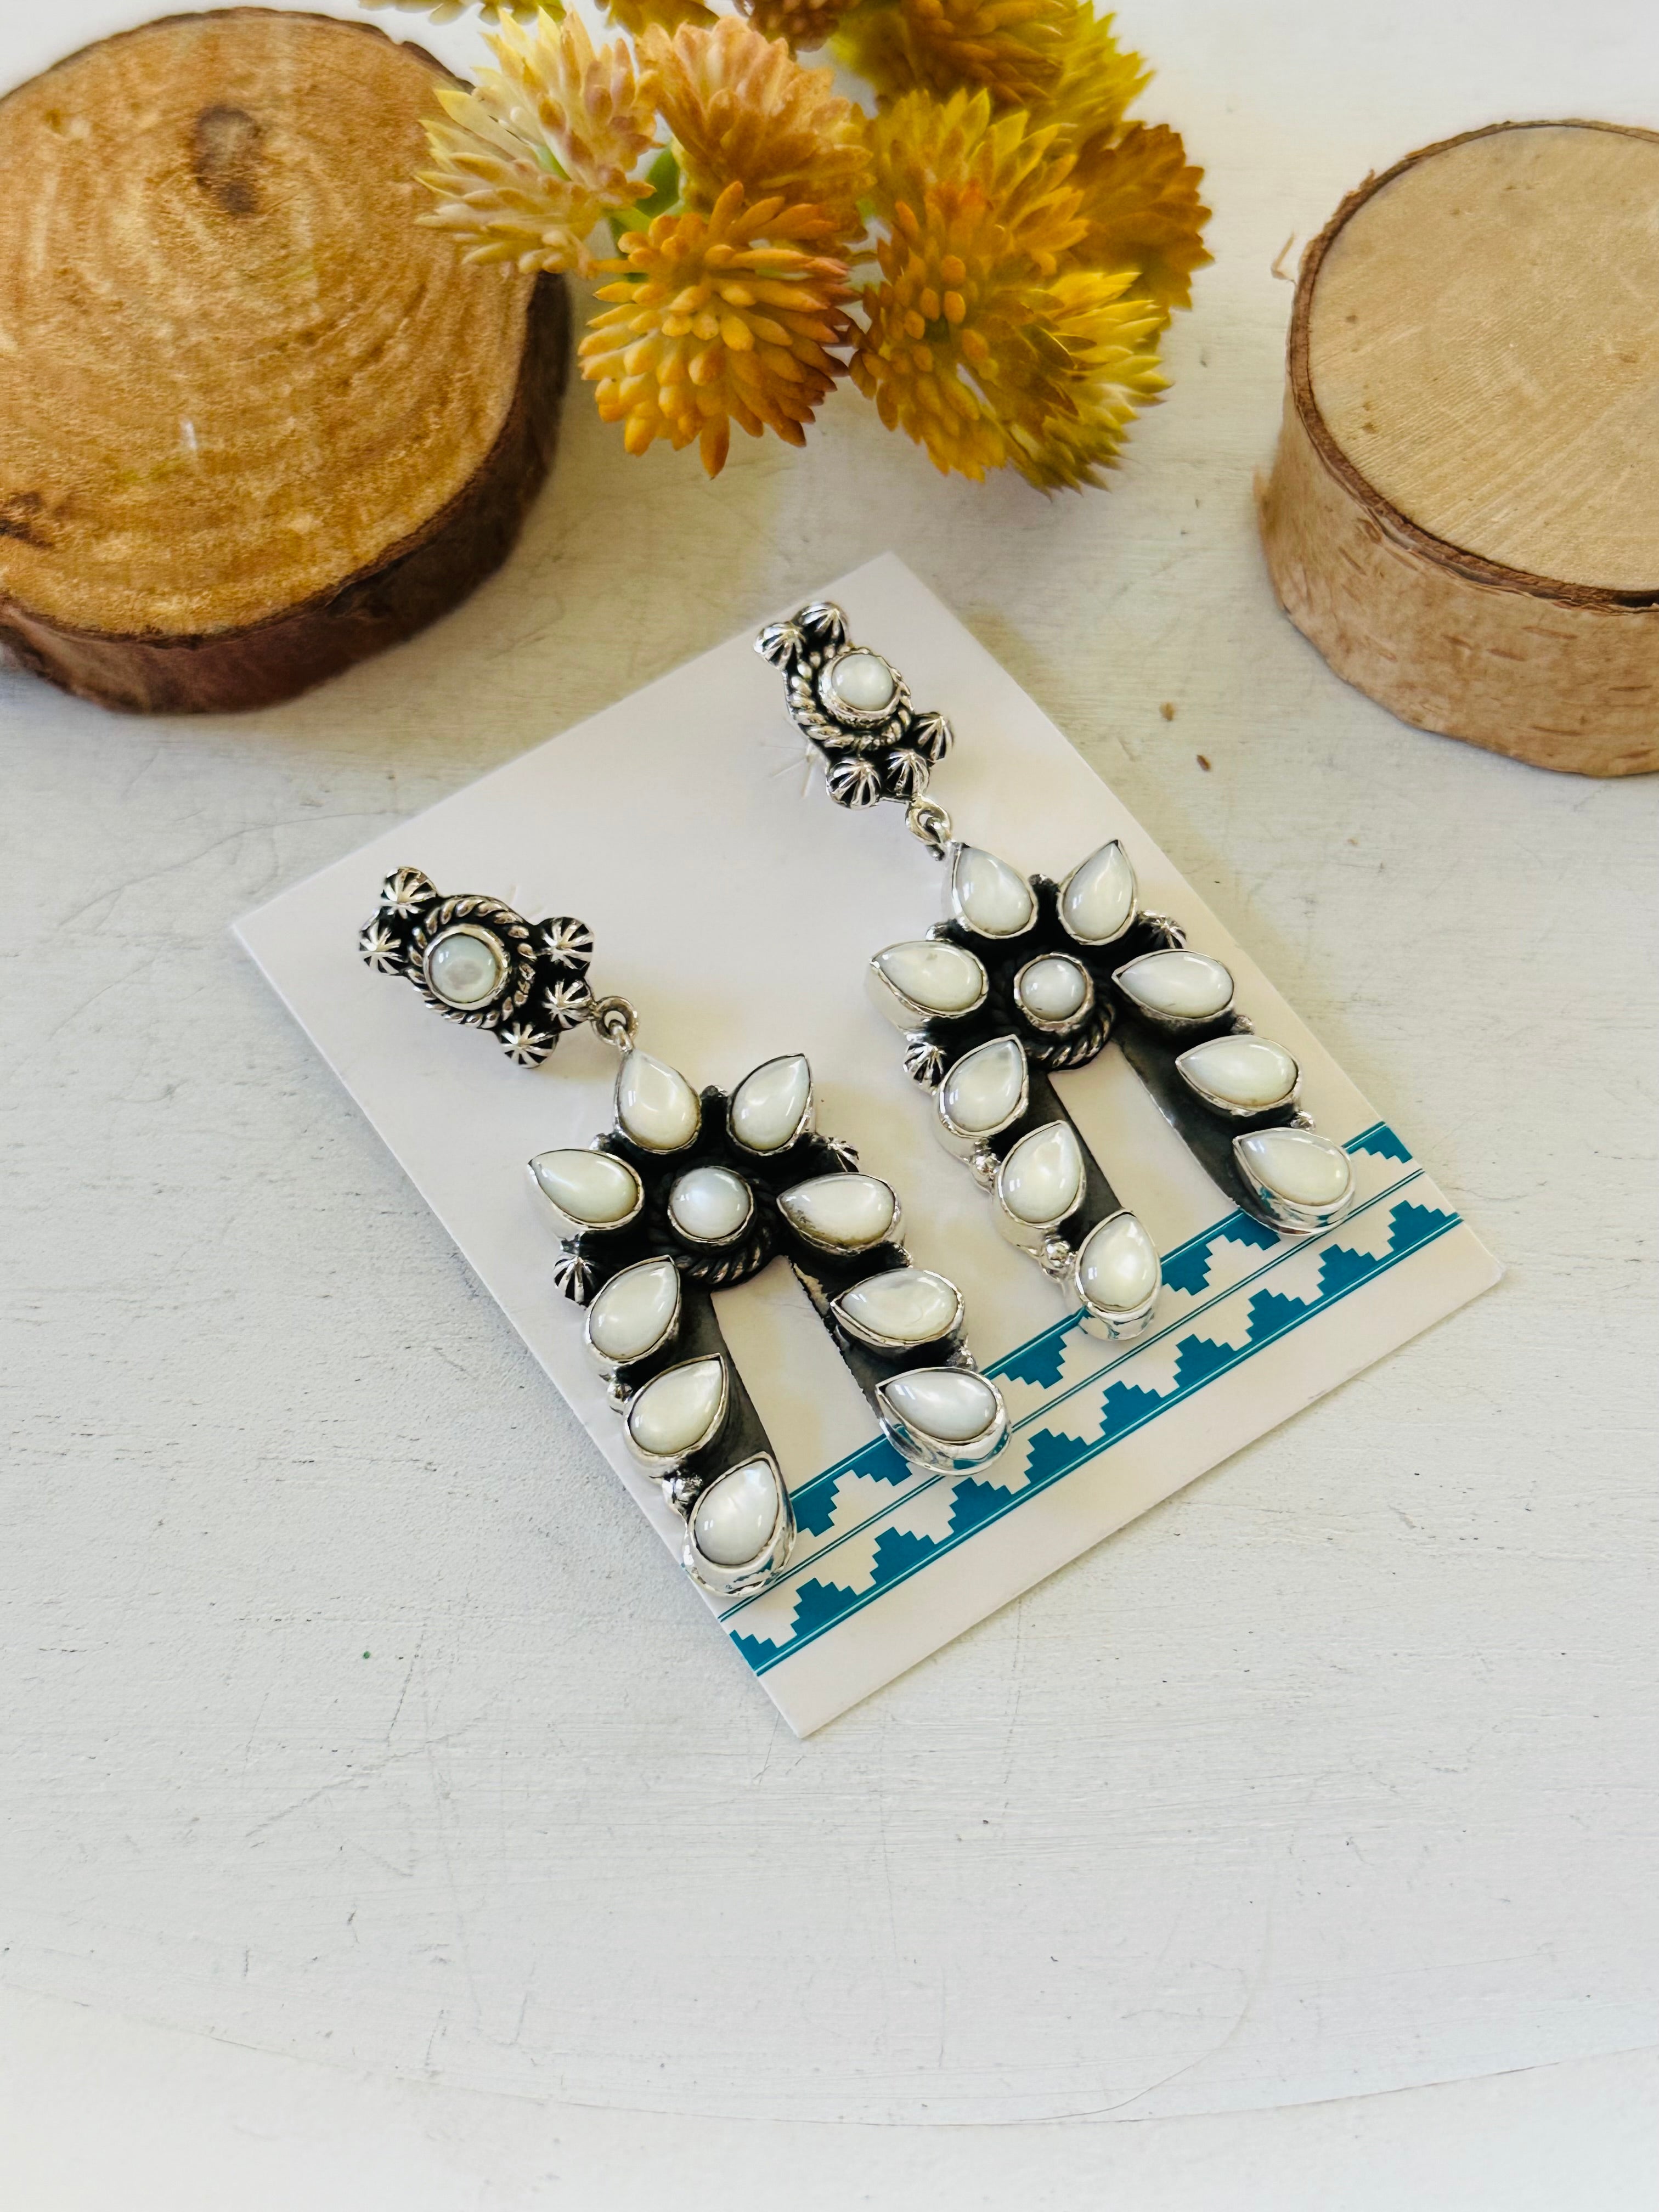 TTD “The Storm” Mother of Pearl & Sterling Silver Earrings